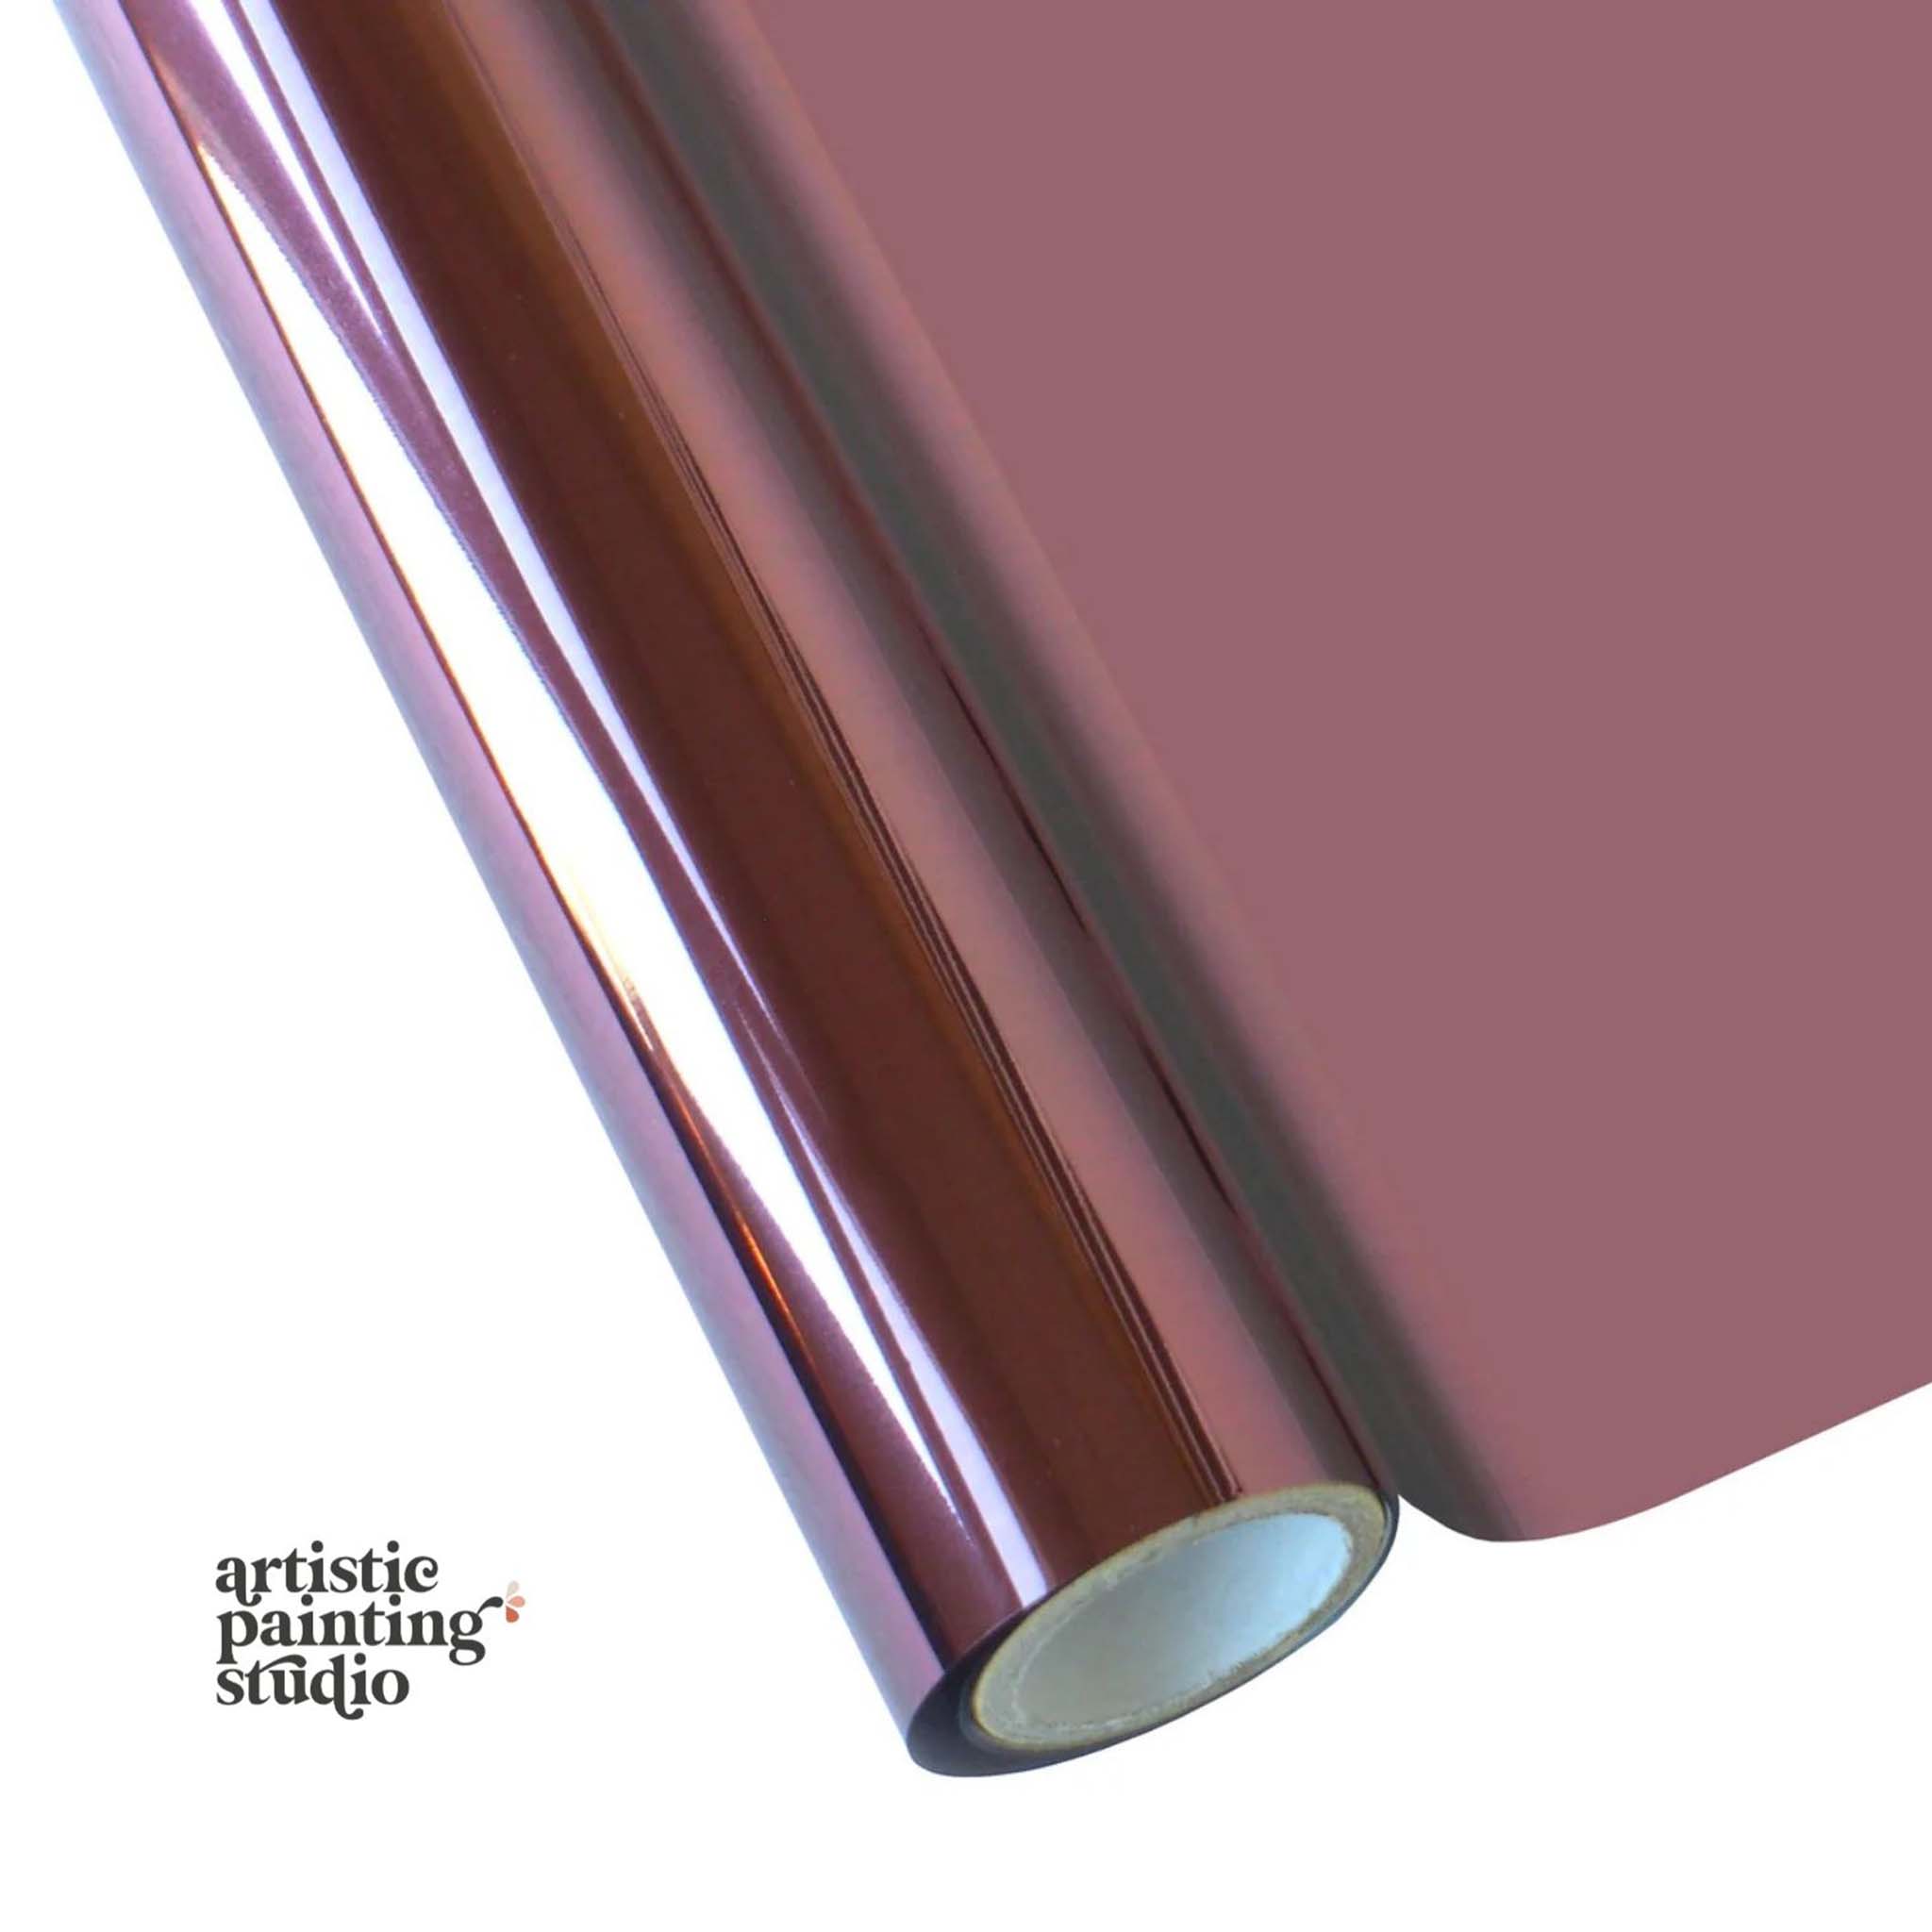 An open roll of a plum metallic foil transfer is against a white background.